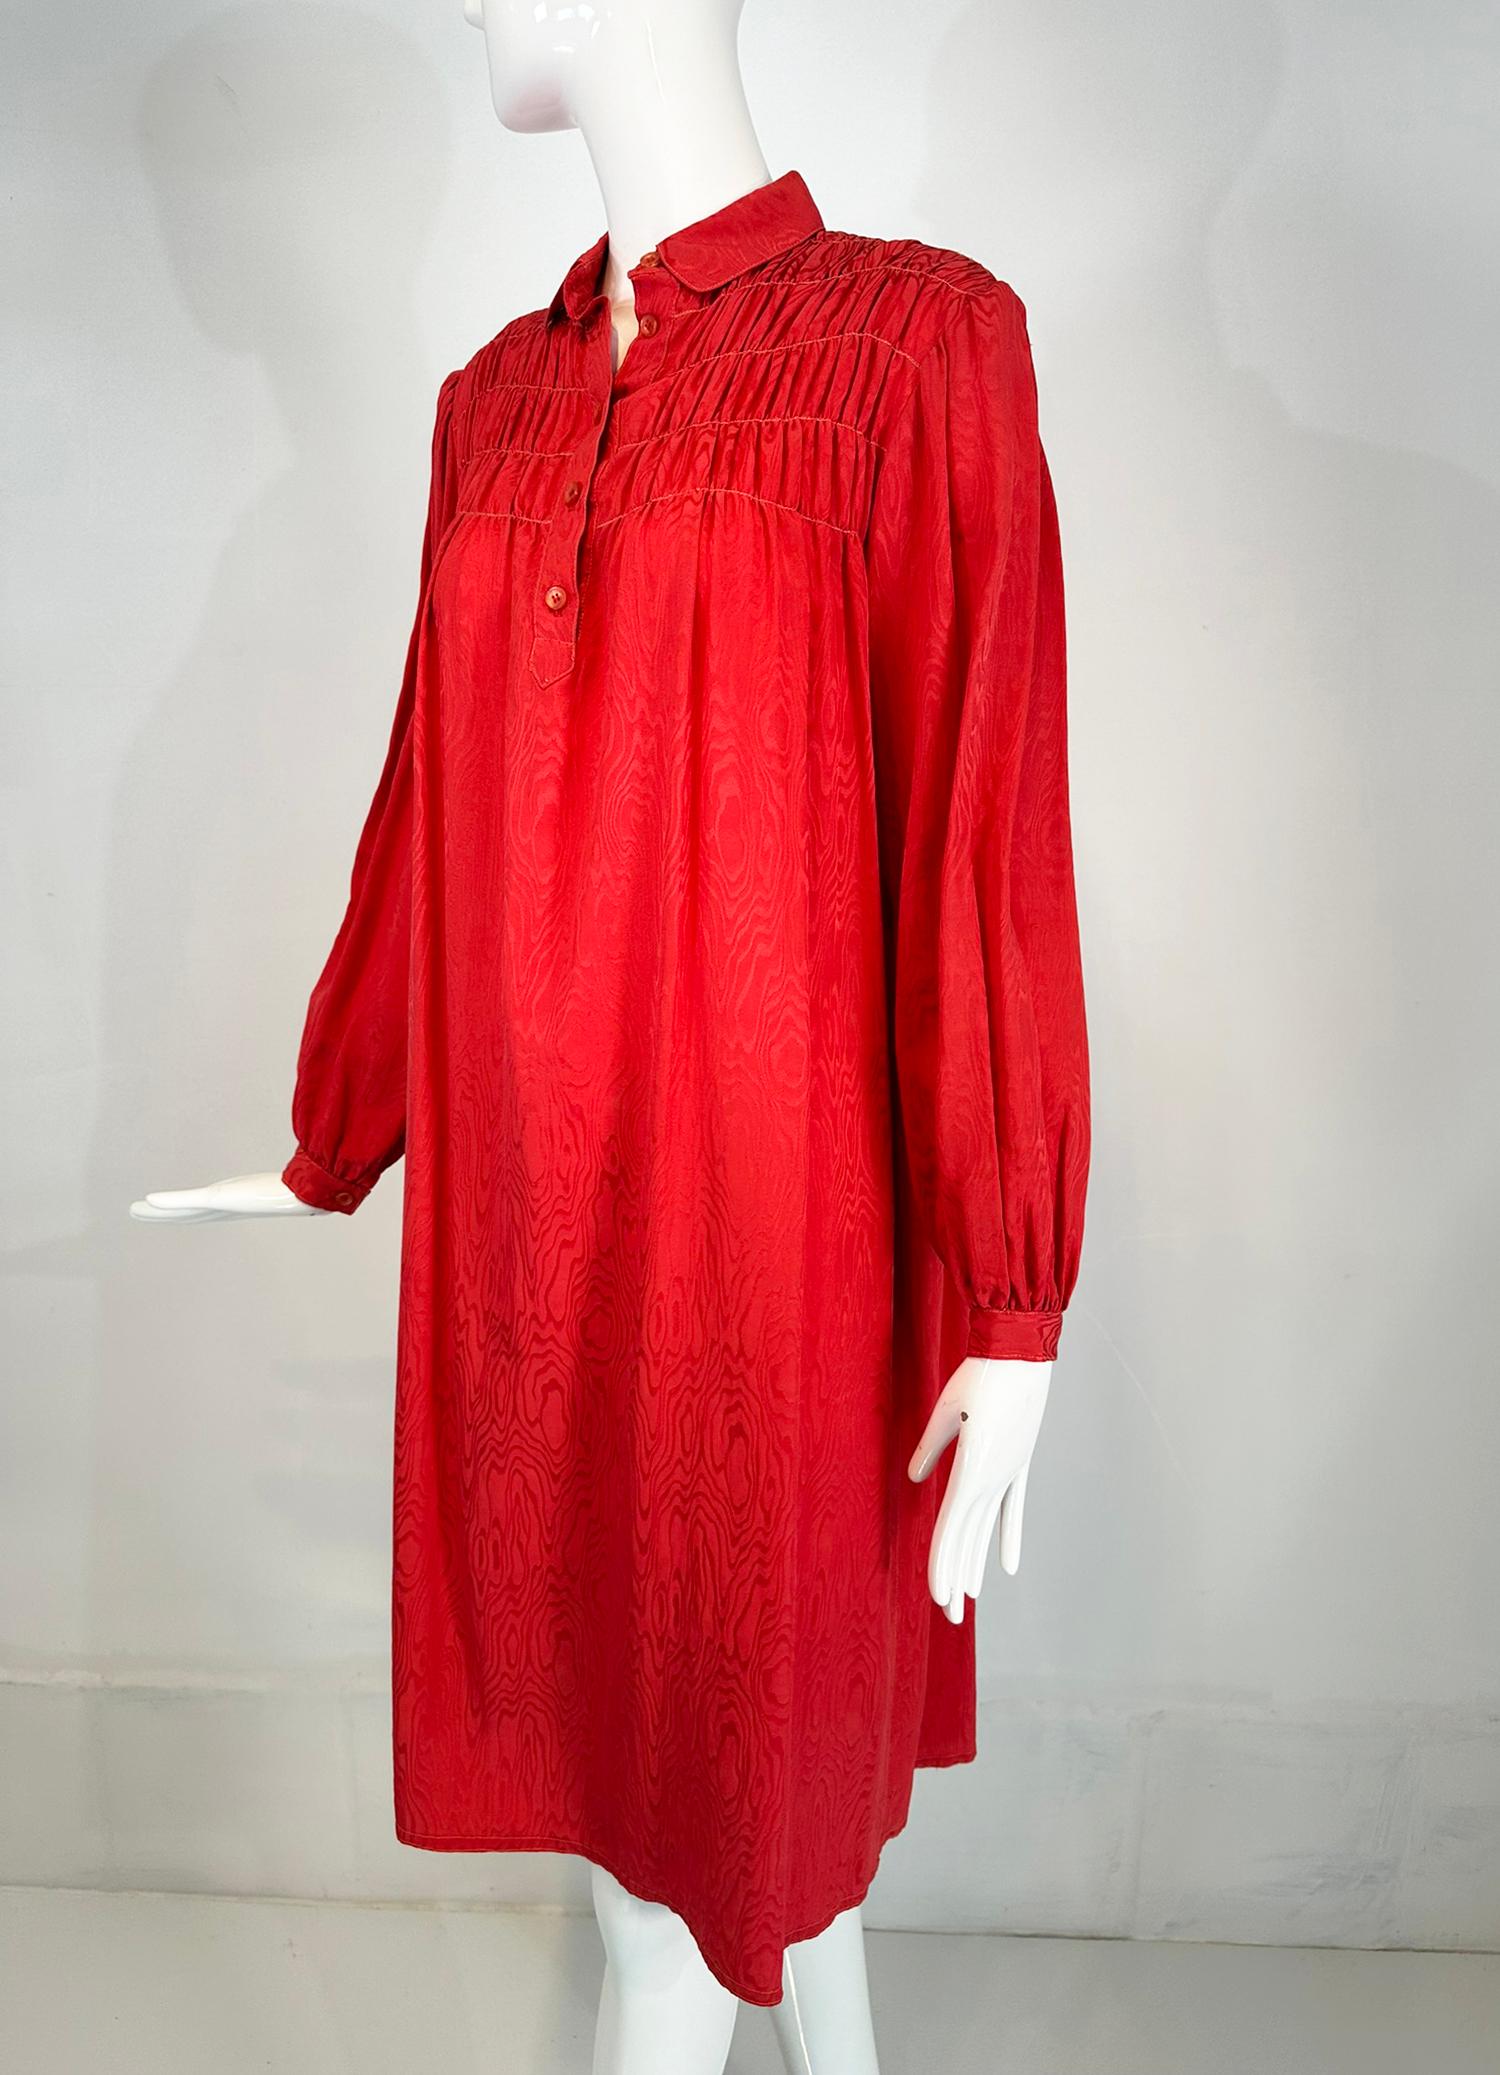 Geoffrey Beene coral red silk jacquard smock dress, from the 1970s. Long sleeve button cuff dress has a Peter Pan collar and button front placket. Gathered shoulder fronts and back give the look of smocking. The dress is semi full. Unlined. Fits